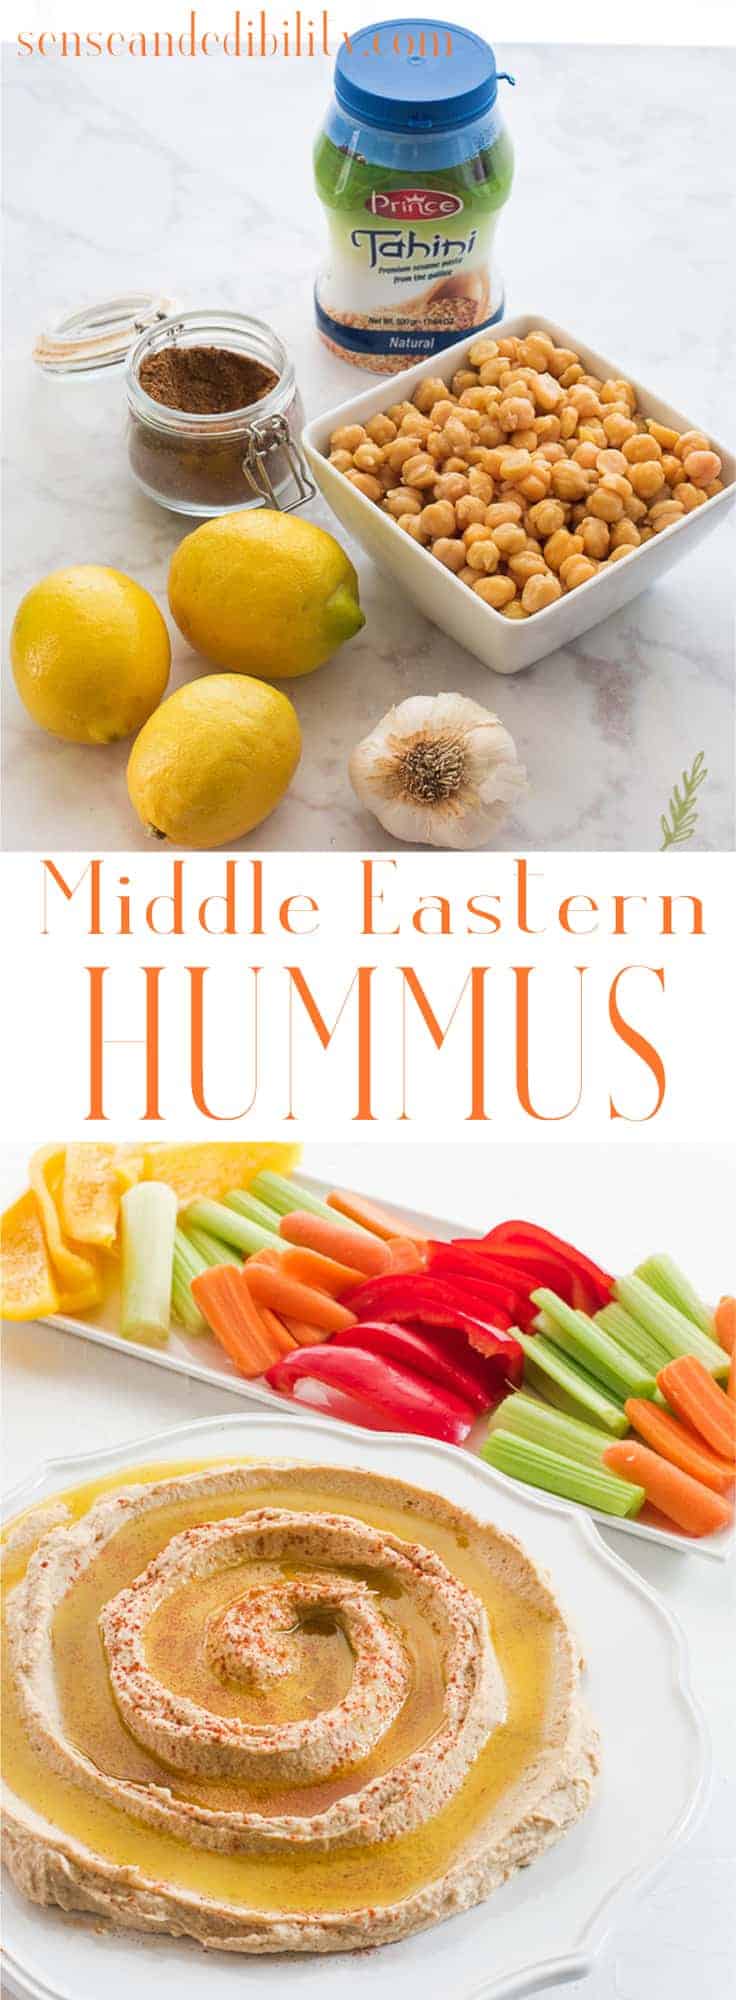 Middle Eastern Hummus is a warmly-spiced, vegan option for snacking or to use as a base for protein or Buddha bowls. Use my Middle Eastern Spice Blend or a store-bought version. #hummus #middleeastern #mediterranean #chickpeas #tahini #vegan #vegetarian #meatless #dairyfree #eggfree #milkfree #easy #quickfix #kidfriendly #snackboard #grazingboard #charcuterie  via @ediblesense